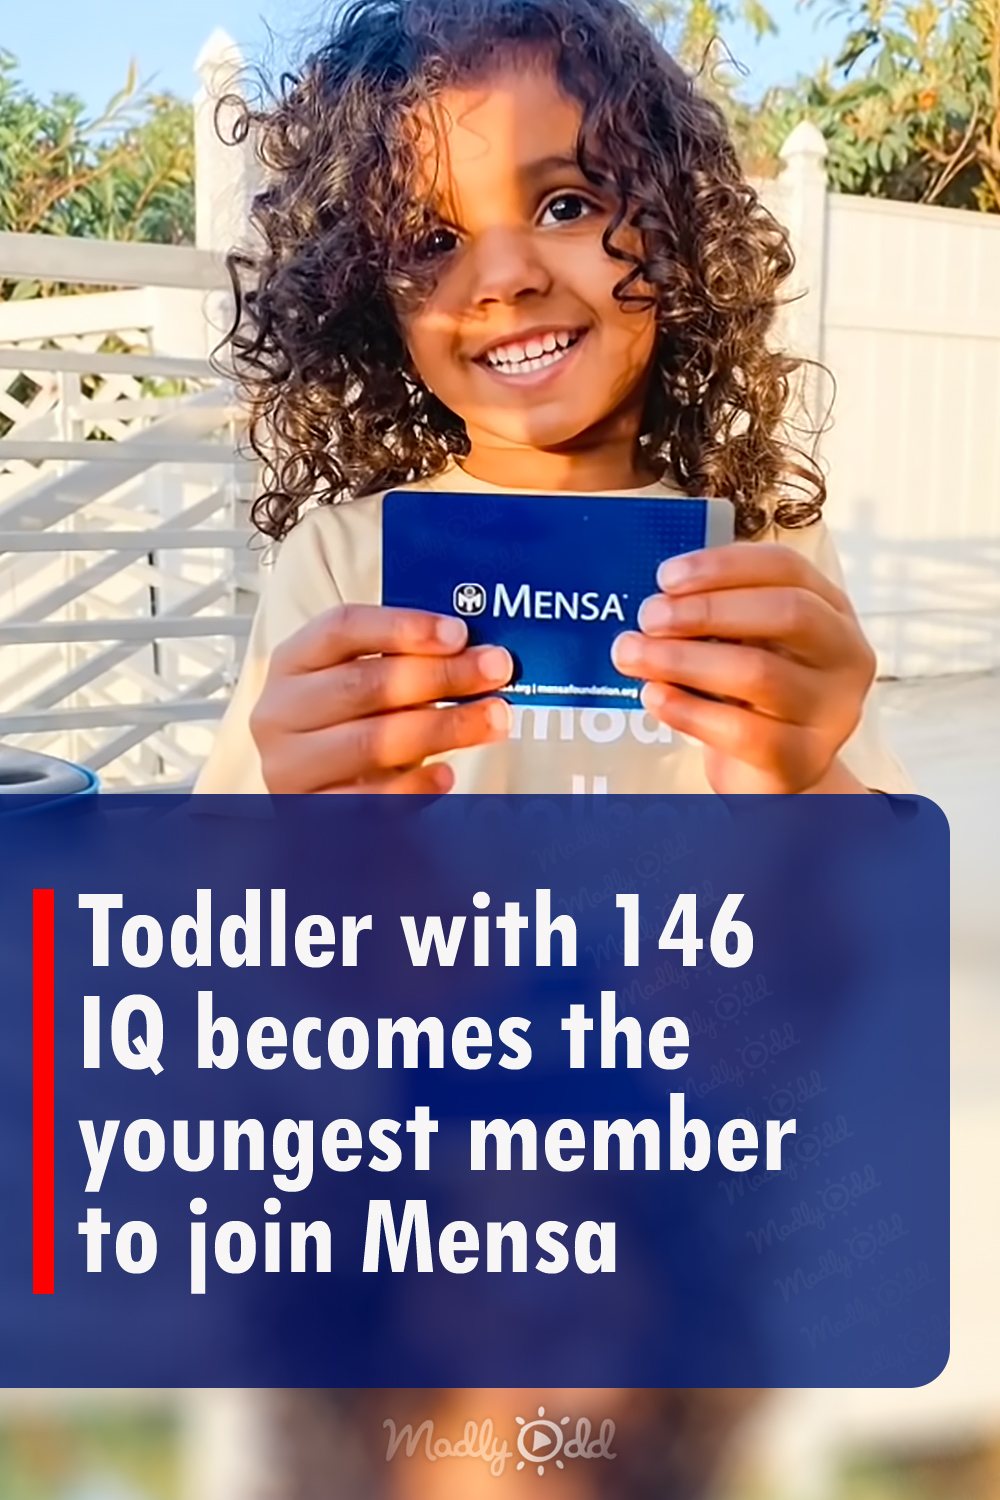 Toddler with 146 IQ becomes the youngest member to join Mensa